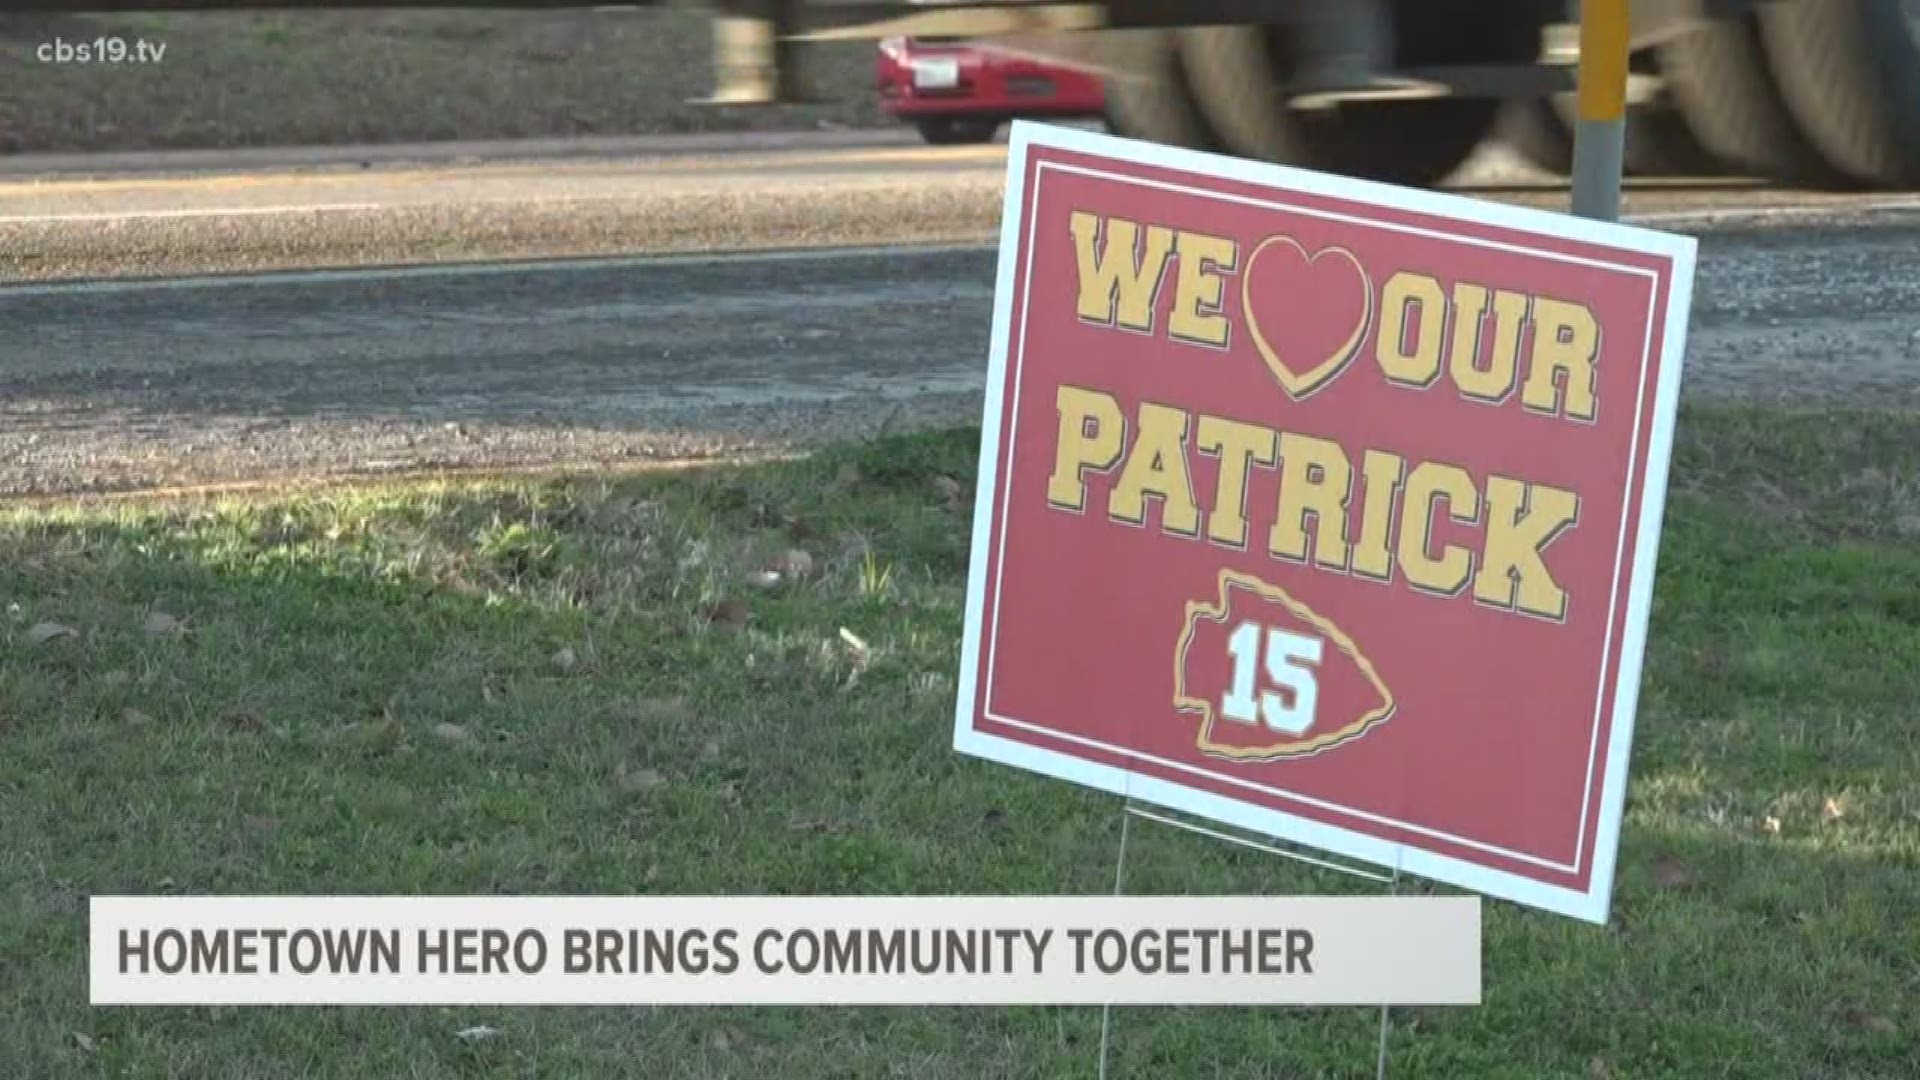 The City of Whitehouse is showing its support for its hometown star, Patrick Mahomes II ahead of the Super Bowl LIV.